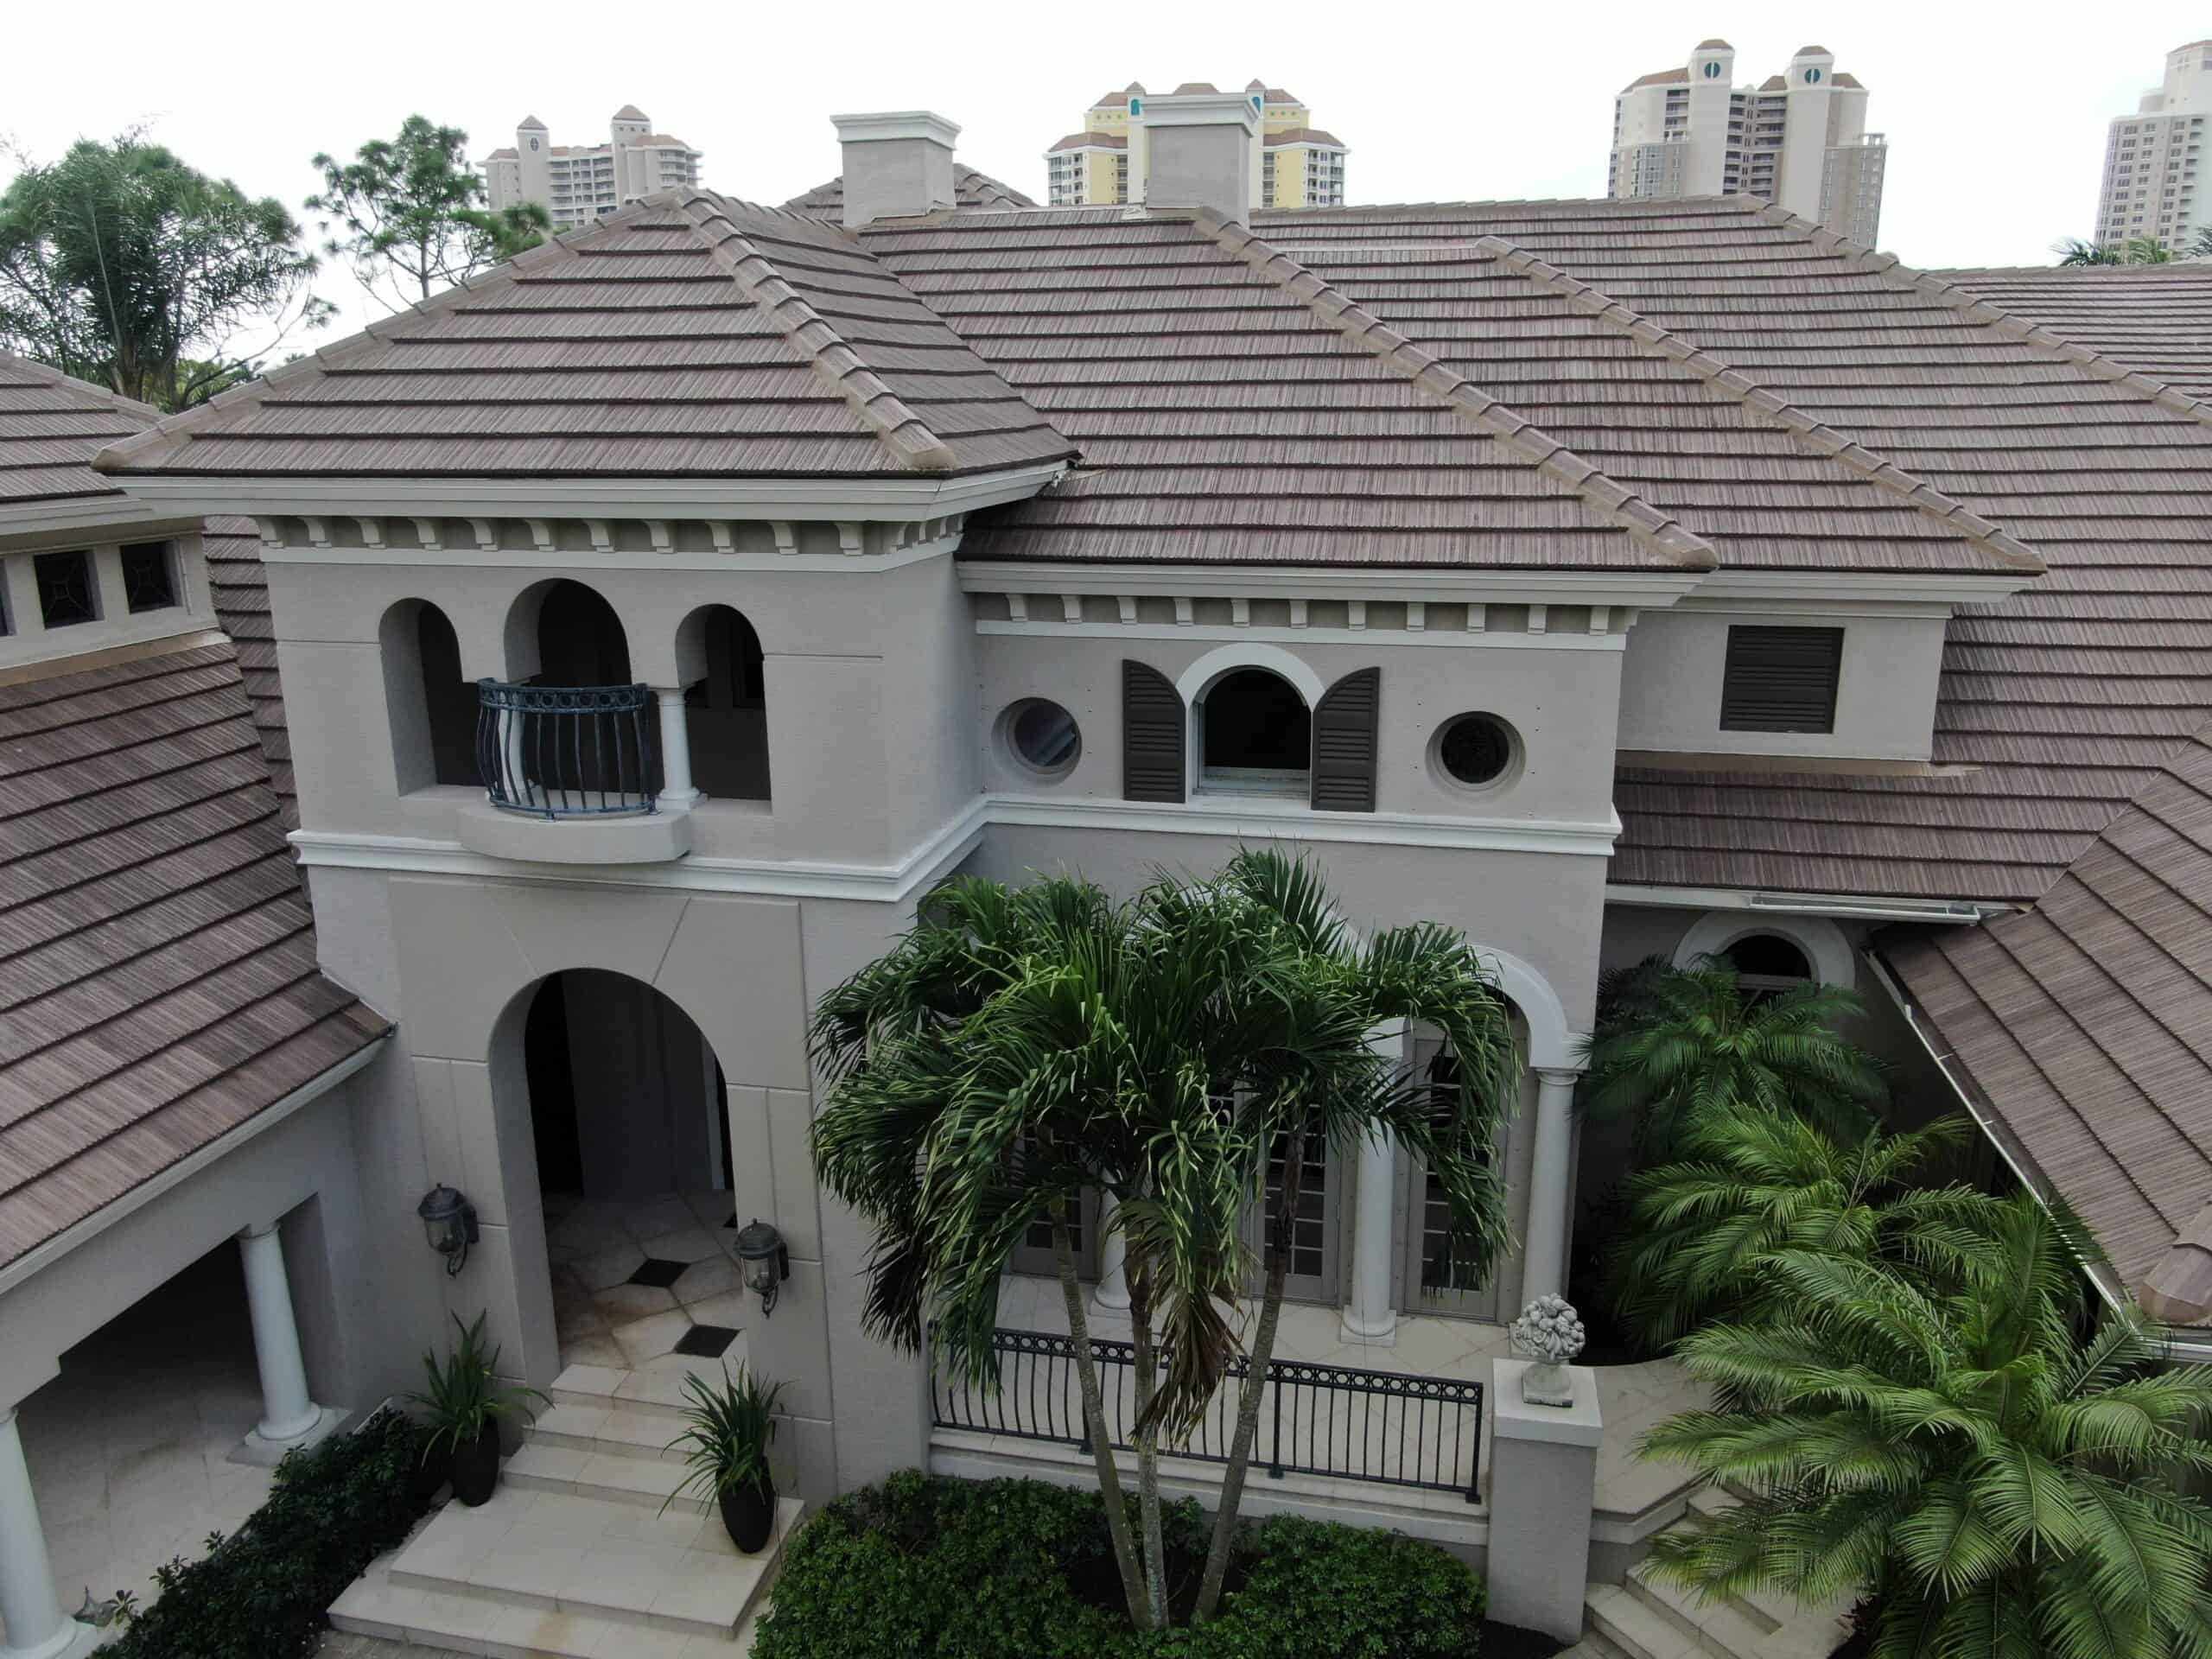 Naples Roofing Companies, Naples Tile Roofing Companies, Naples Roofing Contractors, Roofing Contractors Near Me, Who are the Best Roofing Contractors Near Me